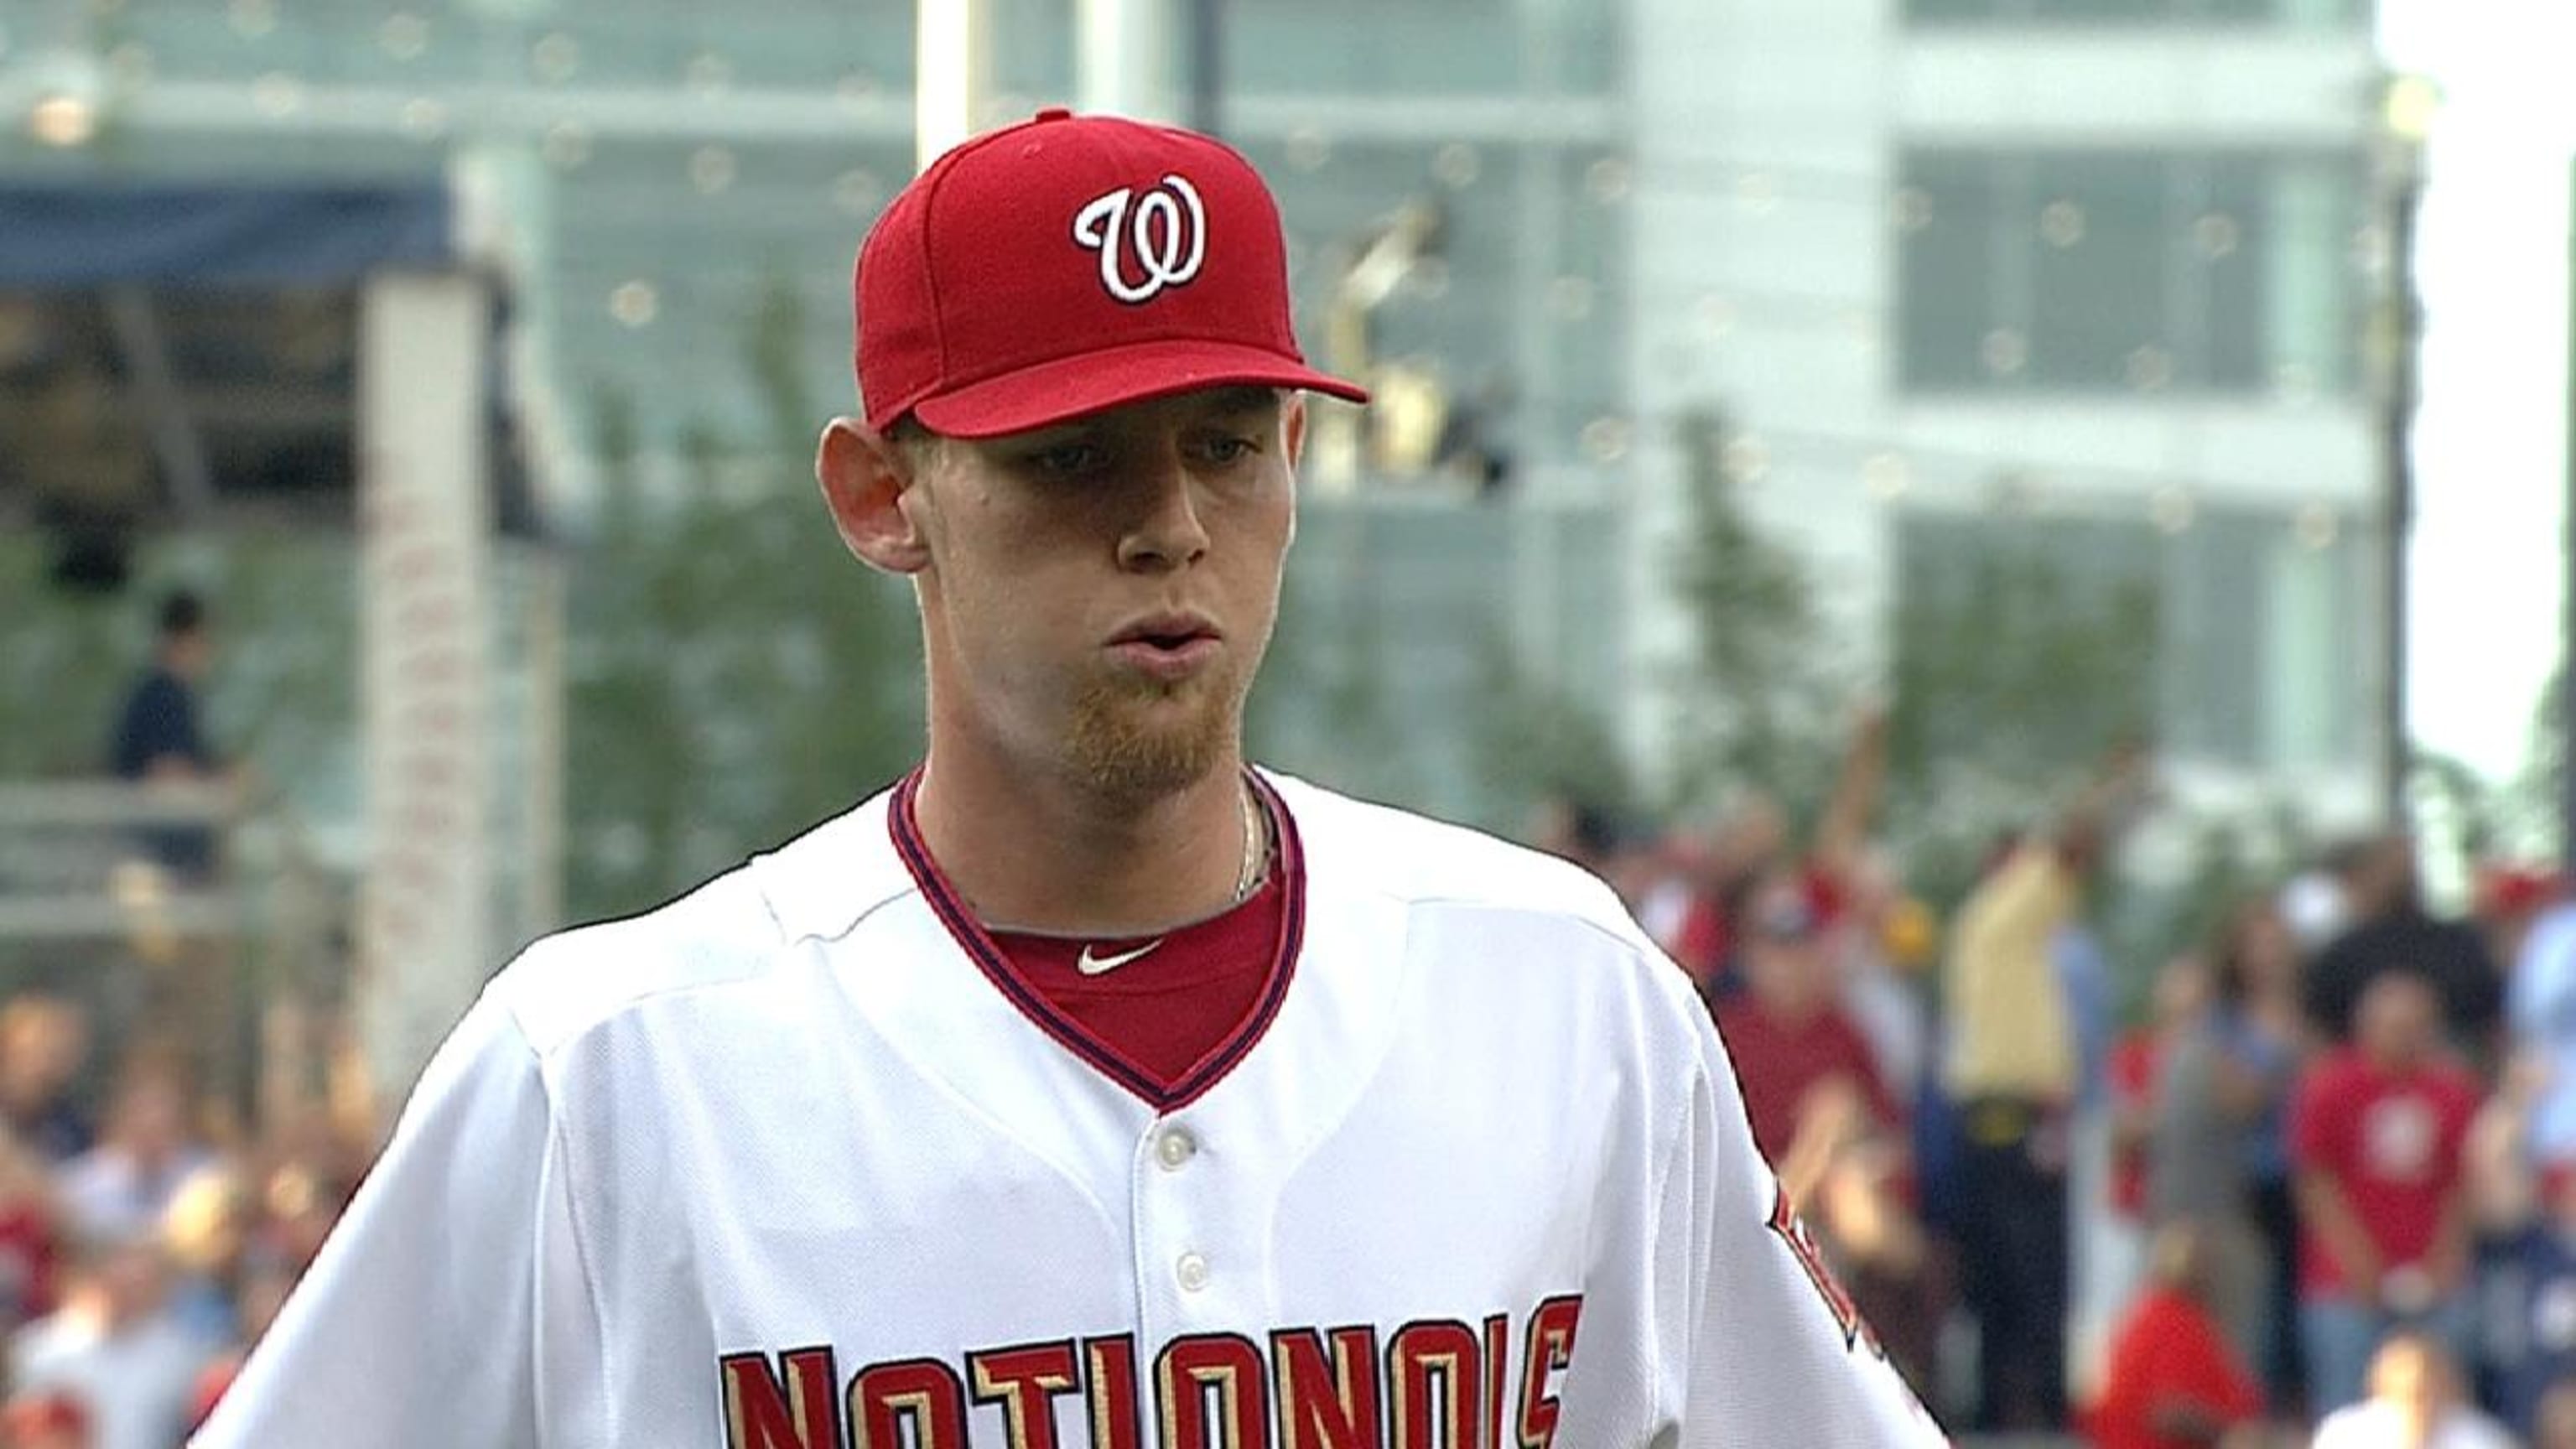 Eight years later, Stephen Strasburg's debut was every bit as